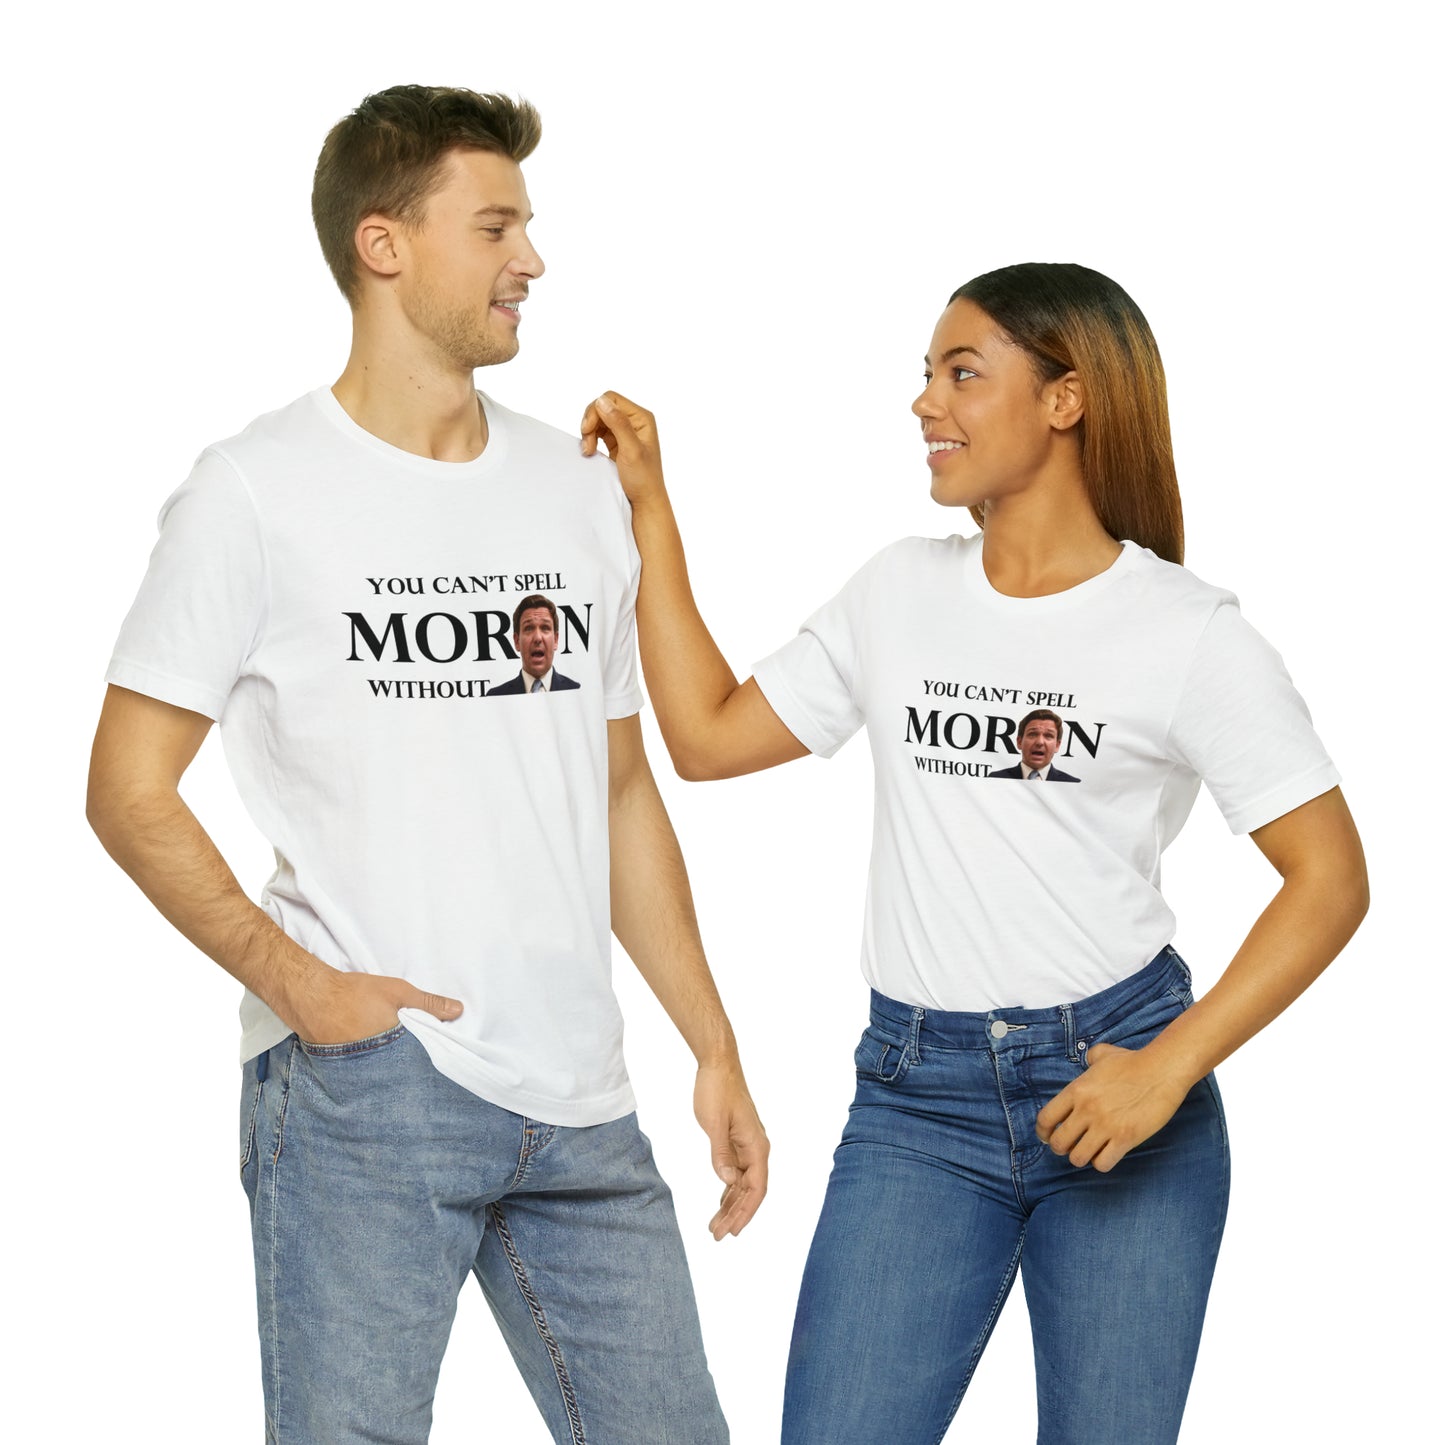 YOU CAN'T SPELL MORON WITHOUT RON! - Unisex Short Sleeve Tee